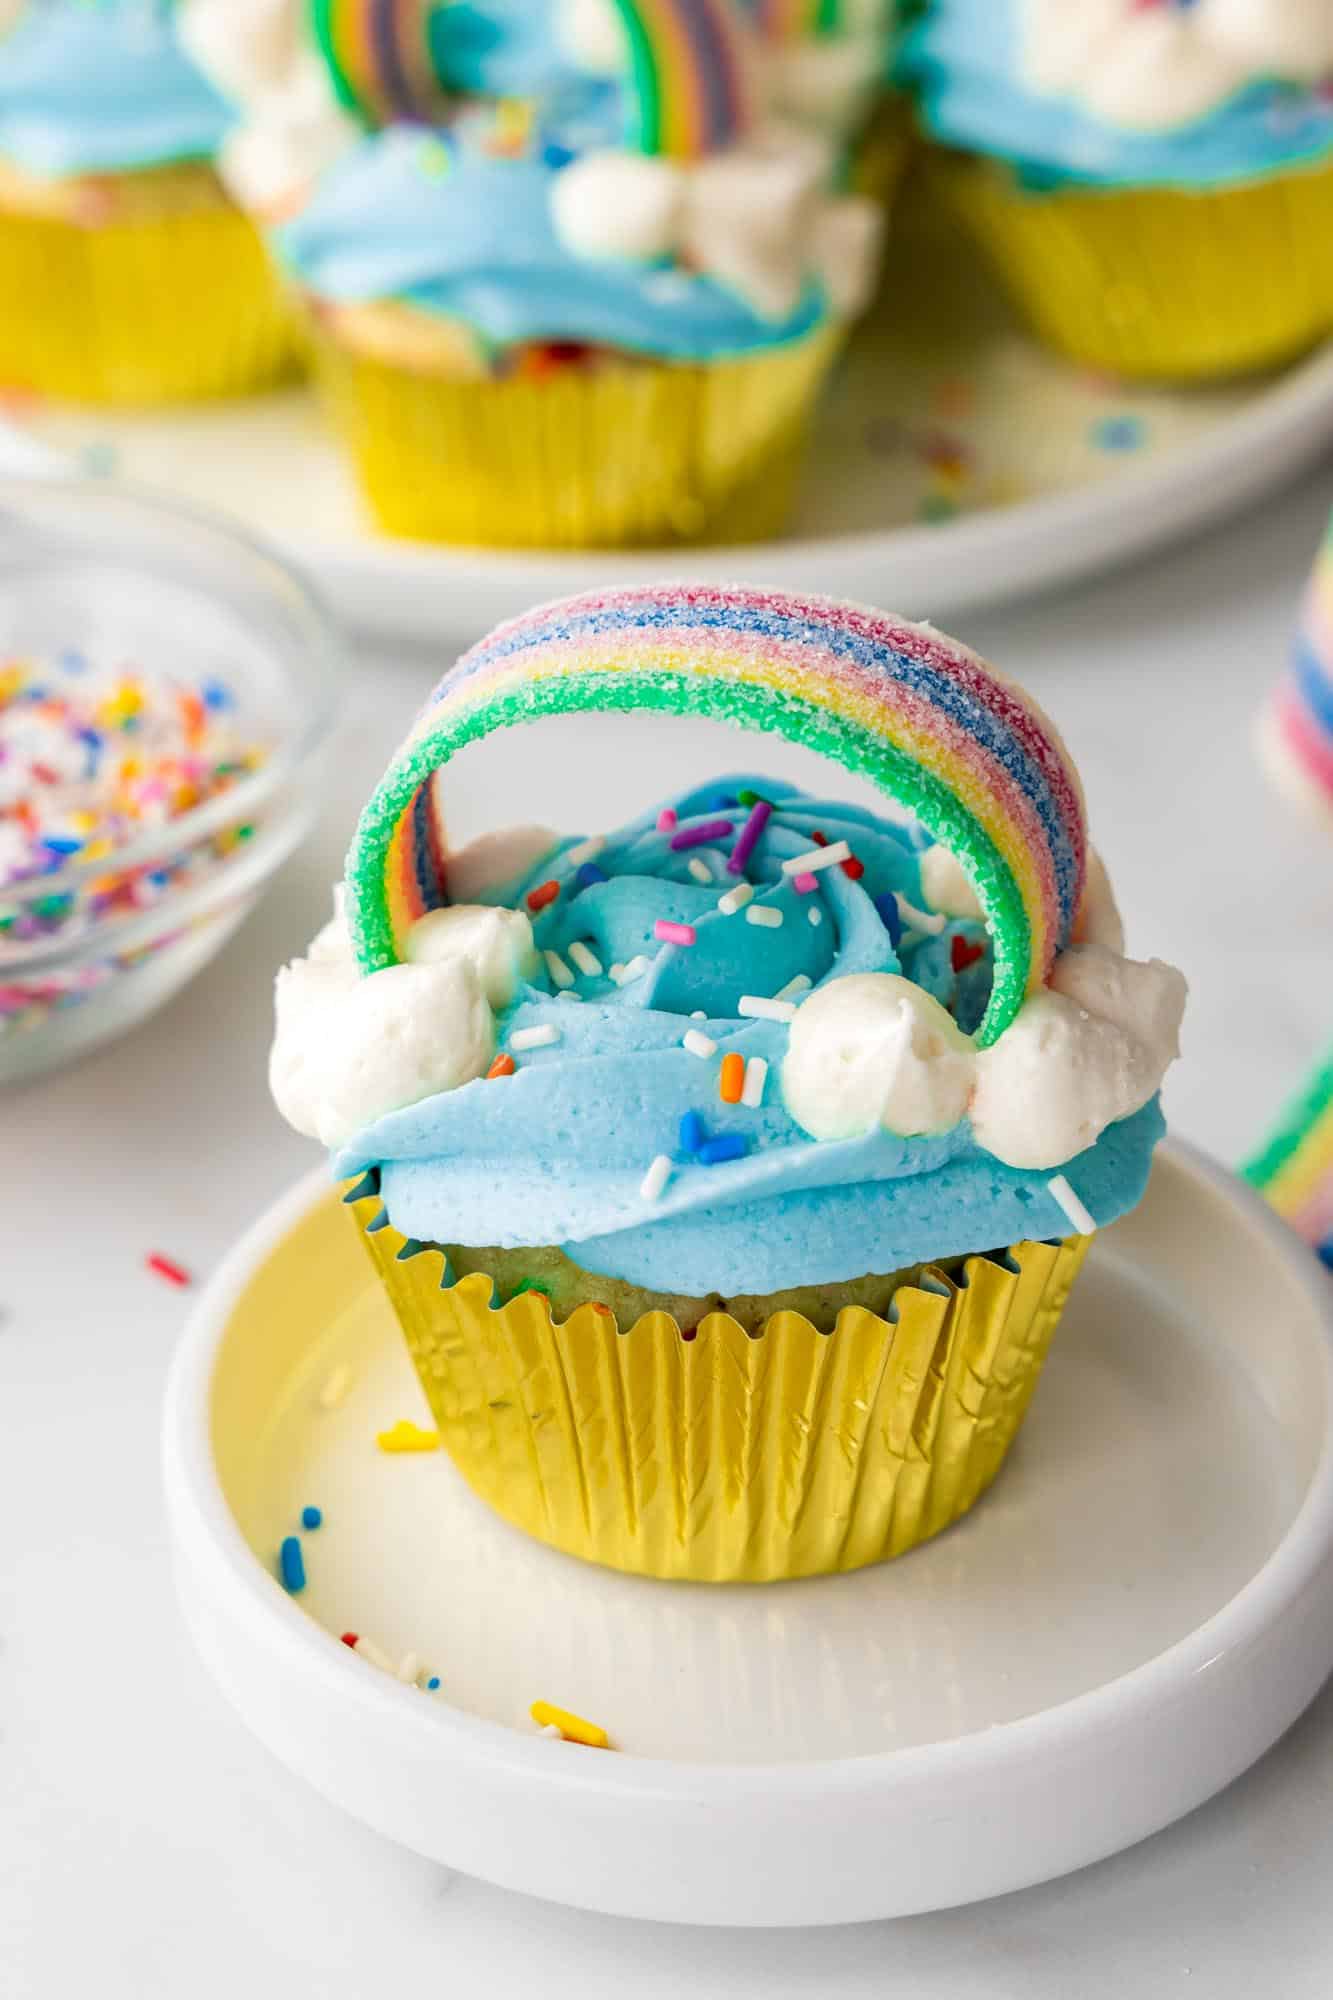 Rainbow cupcakes in a gold wrapper, placed on a small white plate